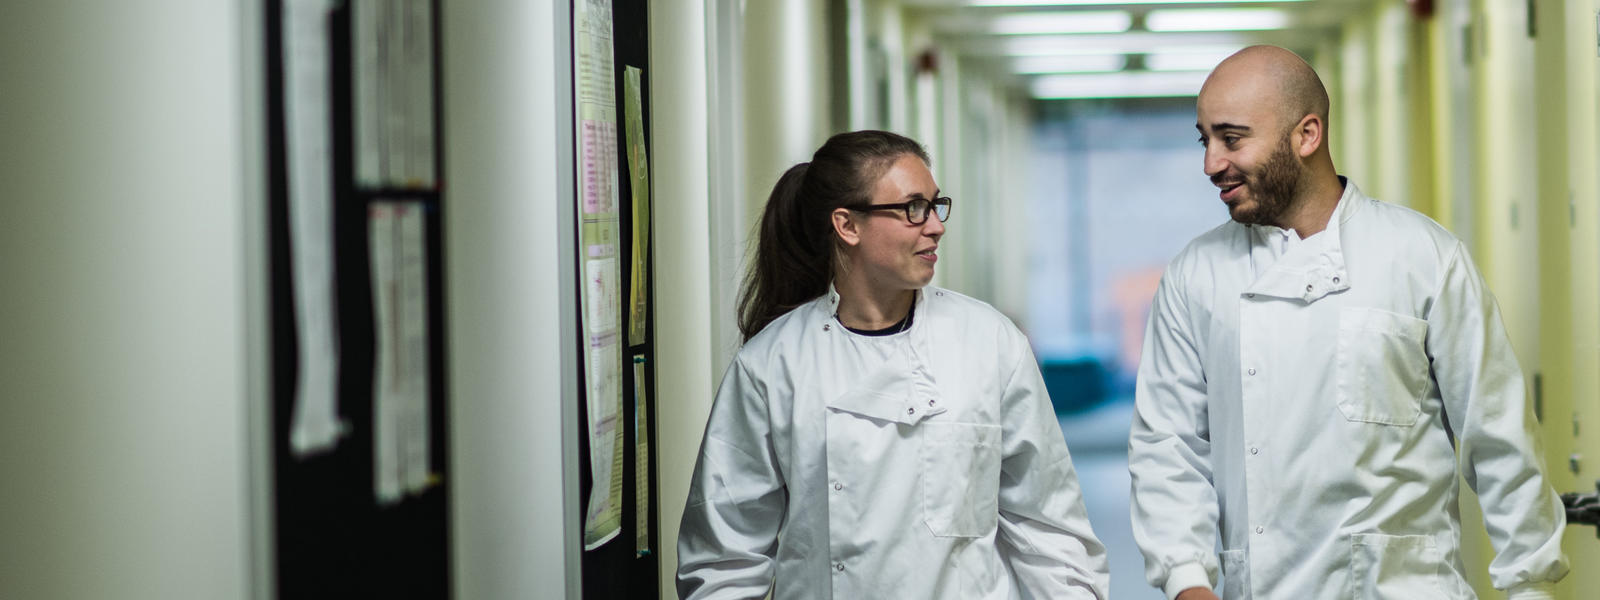 A PhD student discusses work with her supervisor in a laboratory.